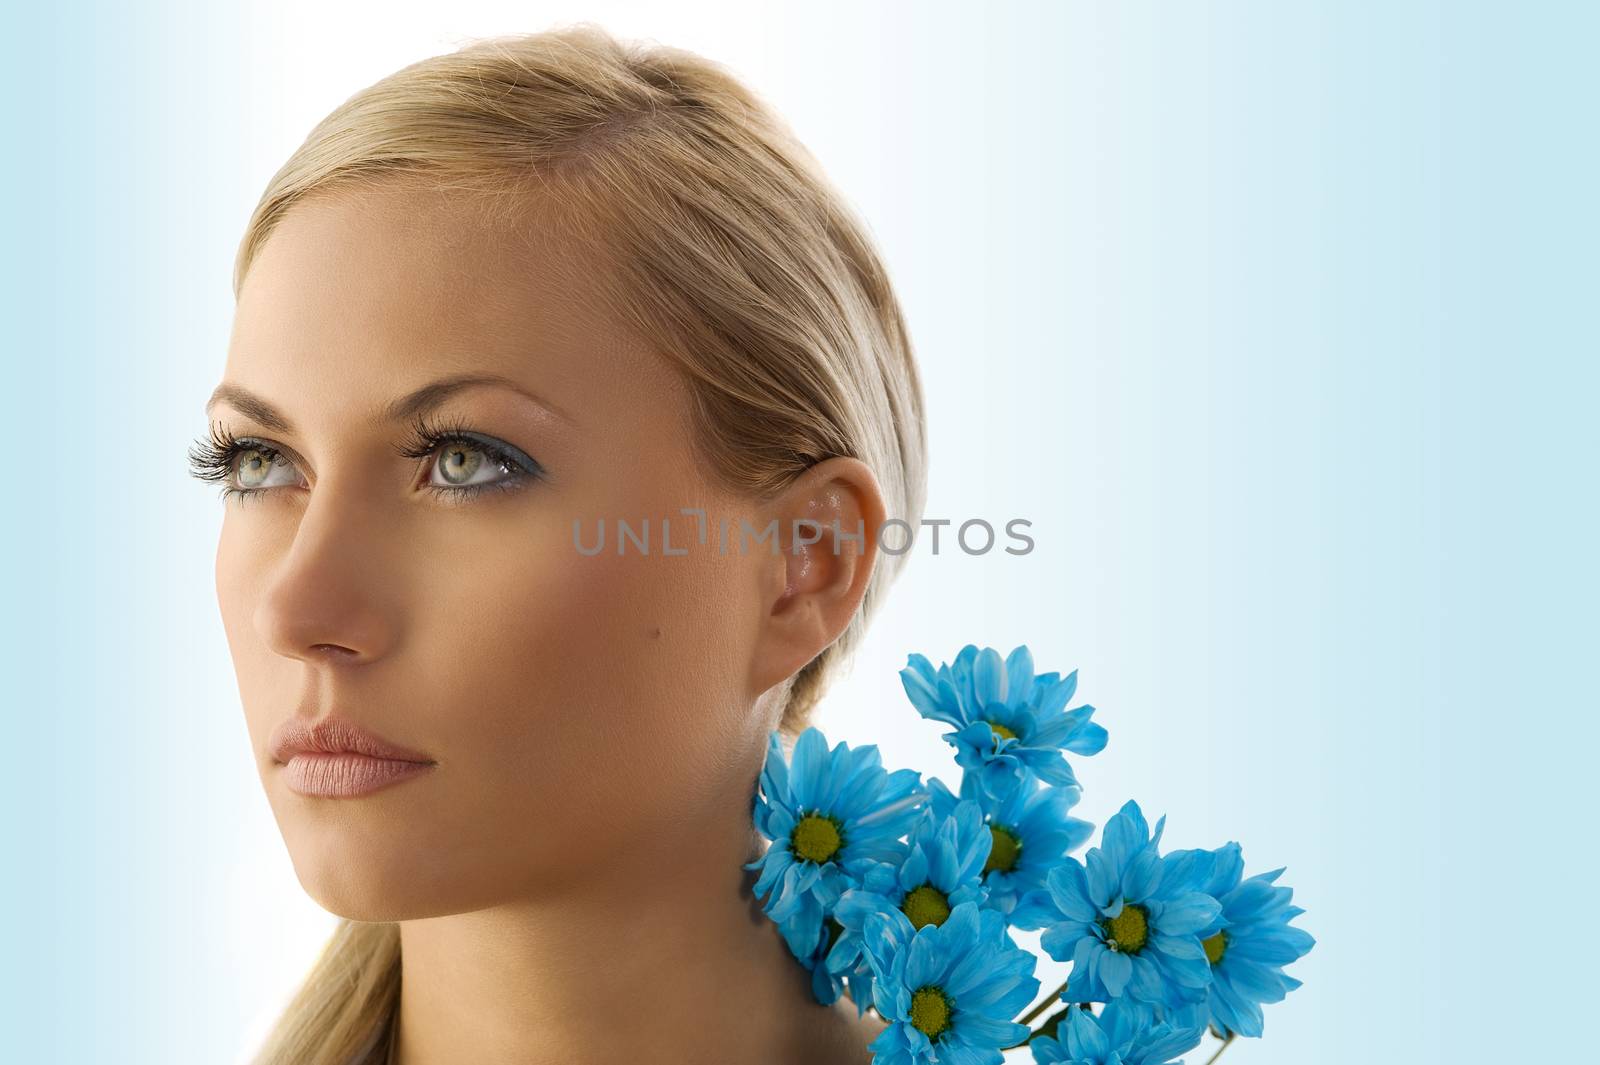 beauty portrait of pretty blond girl with blue daisy